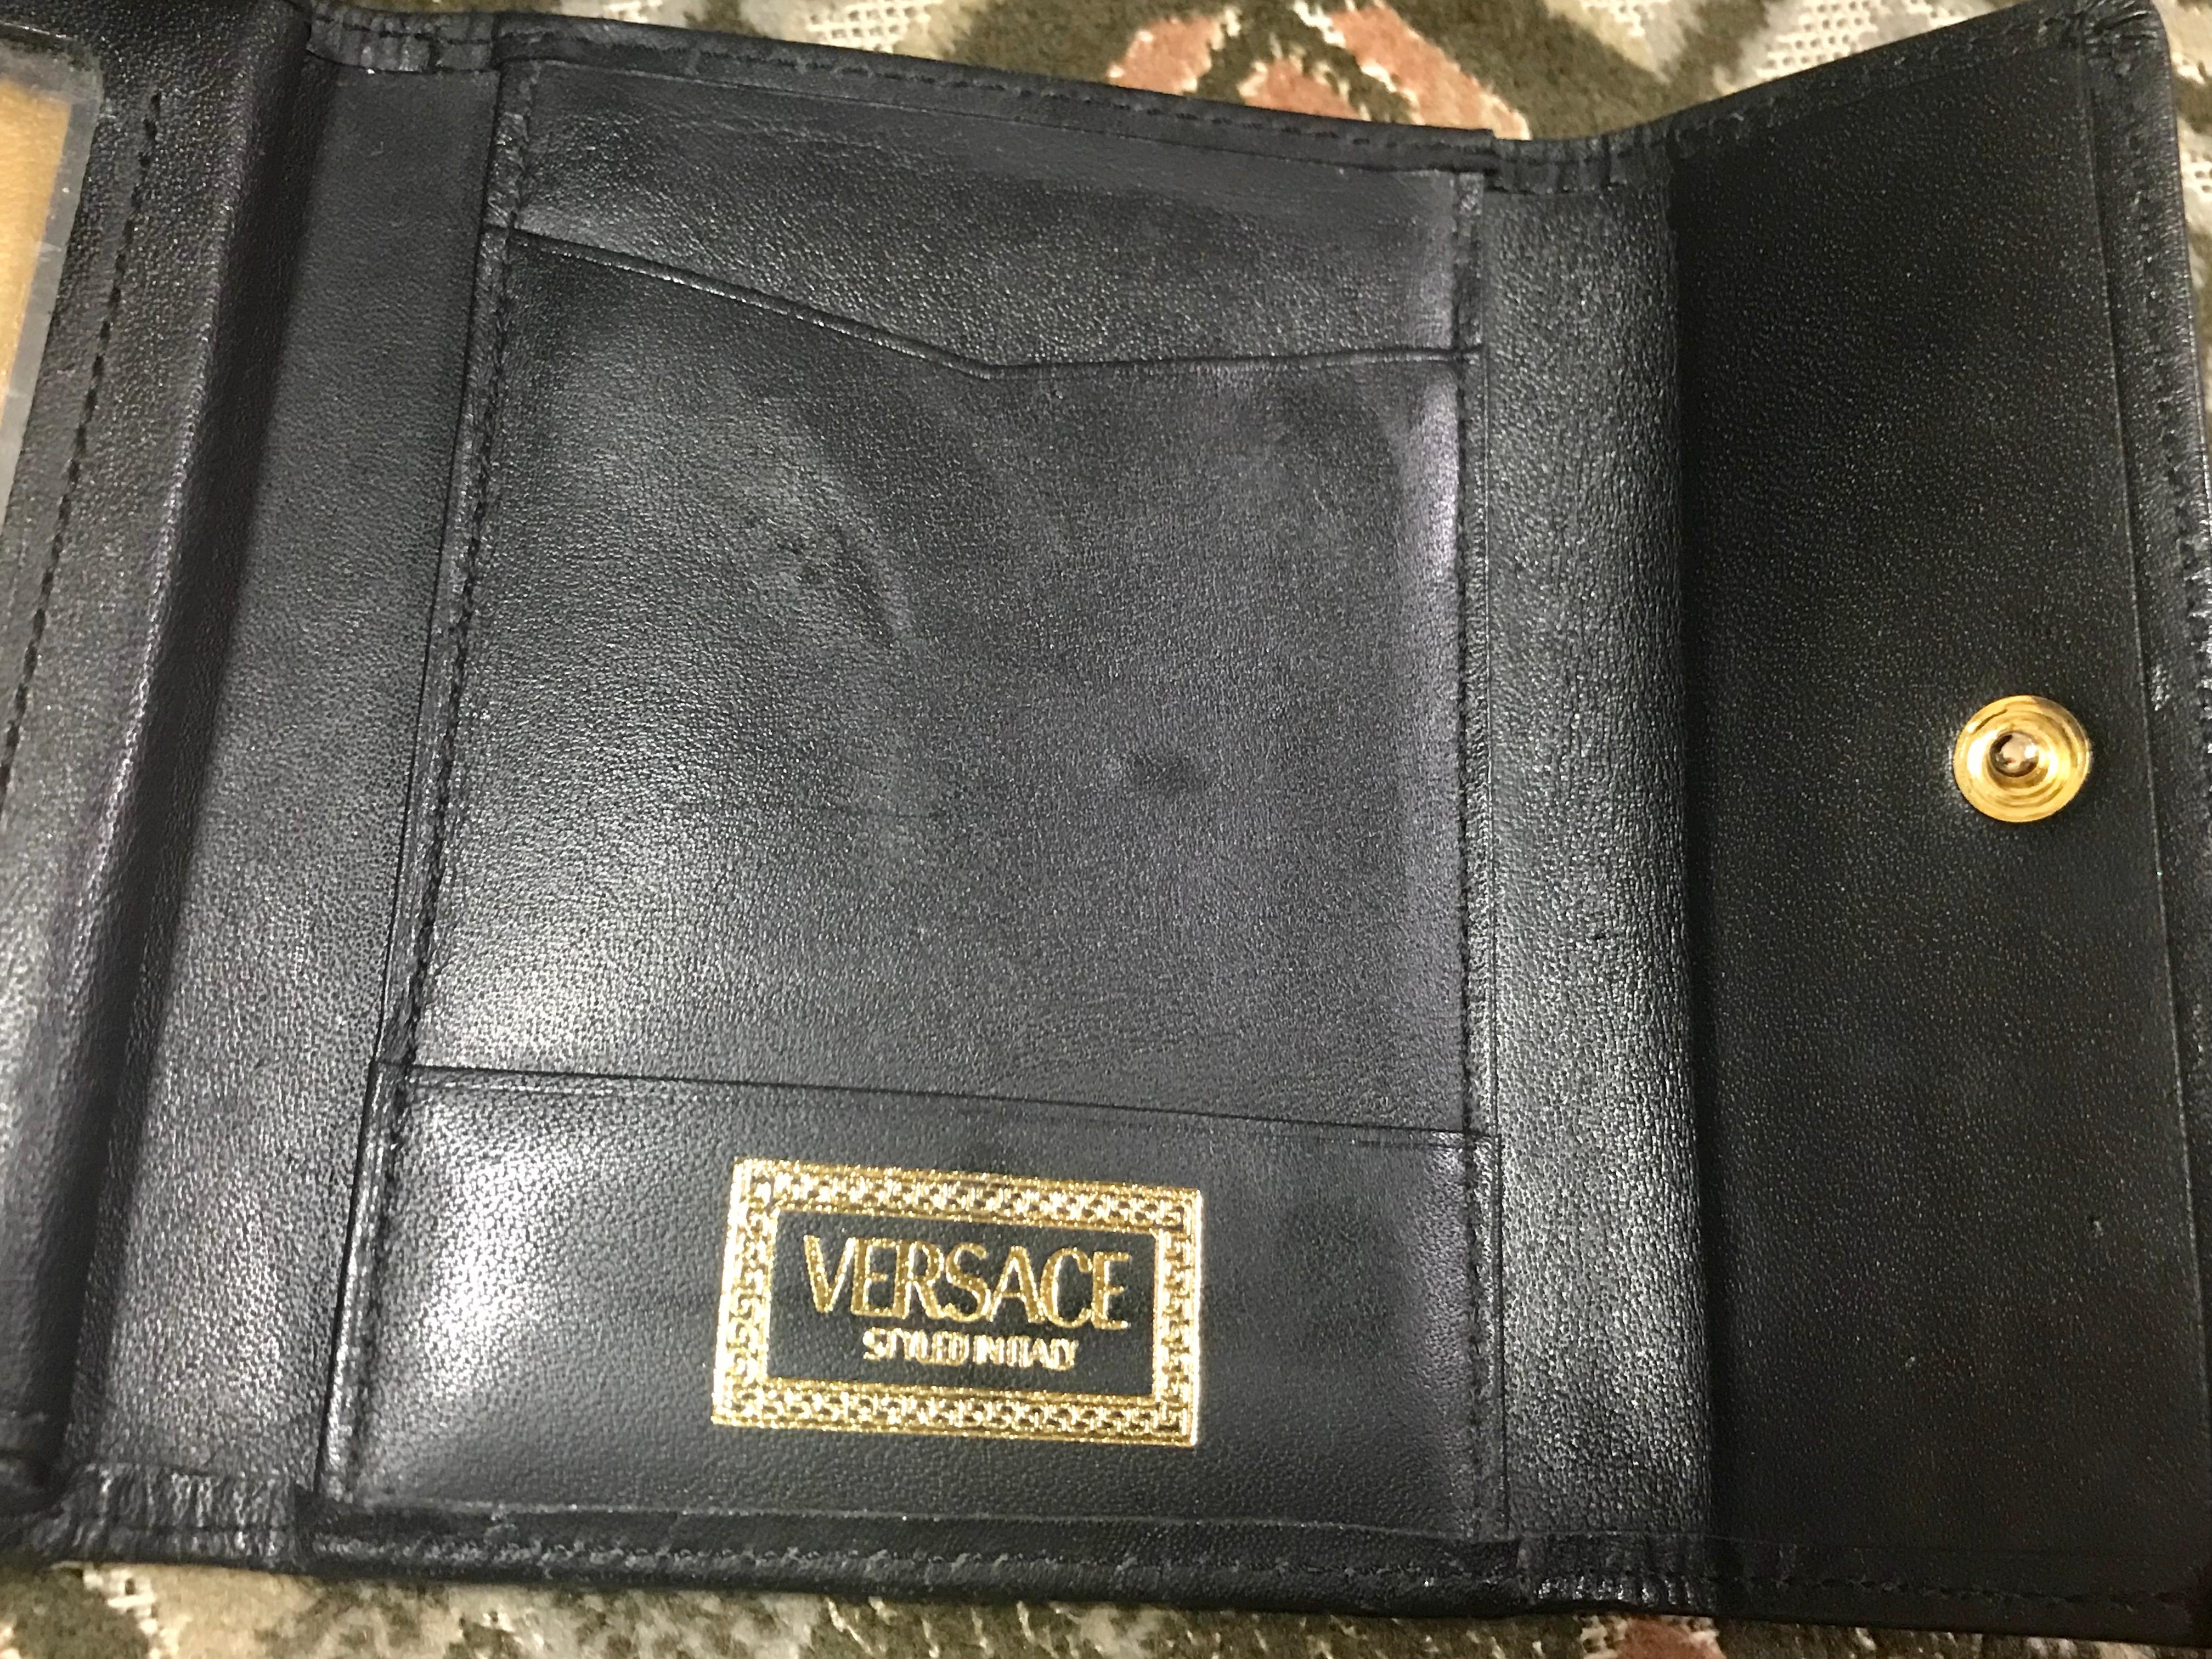 Gianni Versace Vintage black card case wallet with yellow arabesque and leopard  In Good Condition For Sale In Kashiwa, Chiba